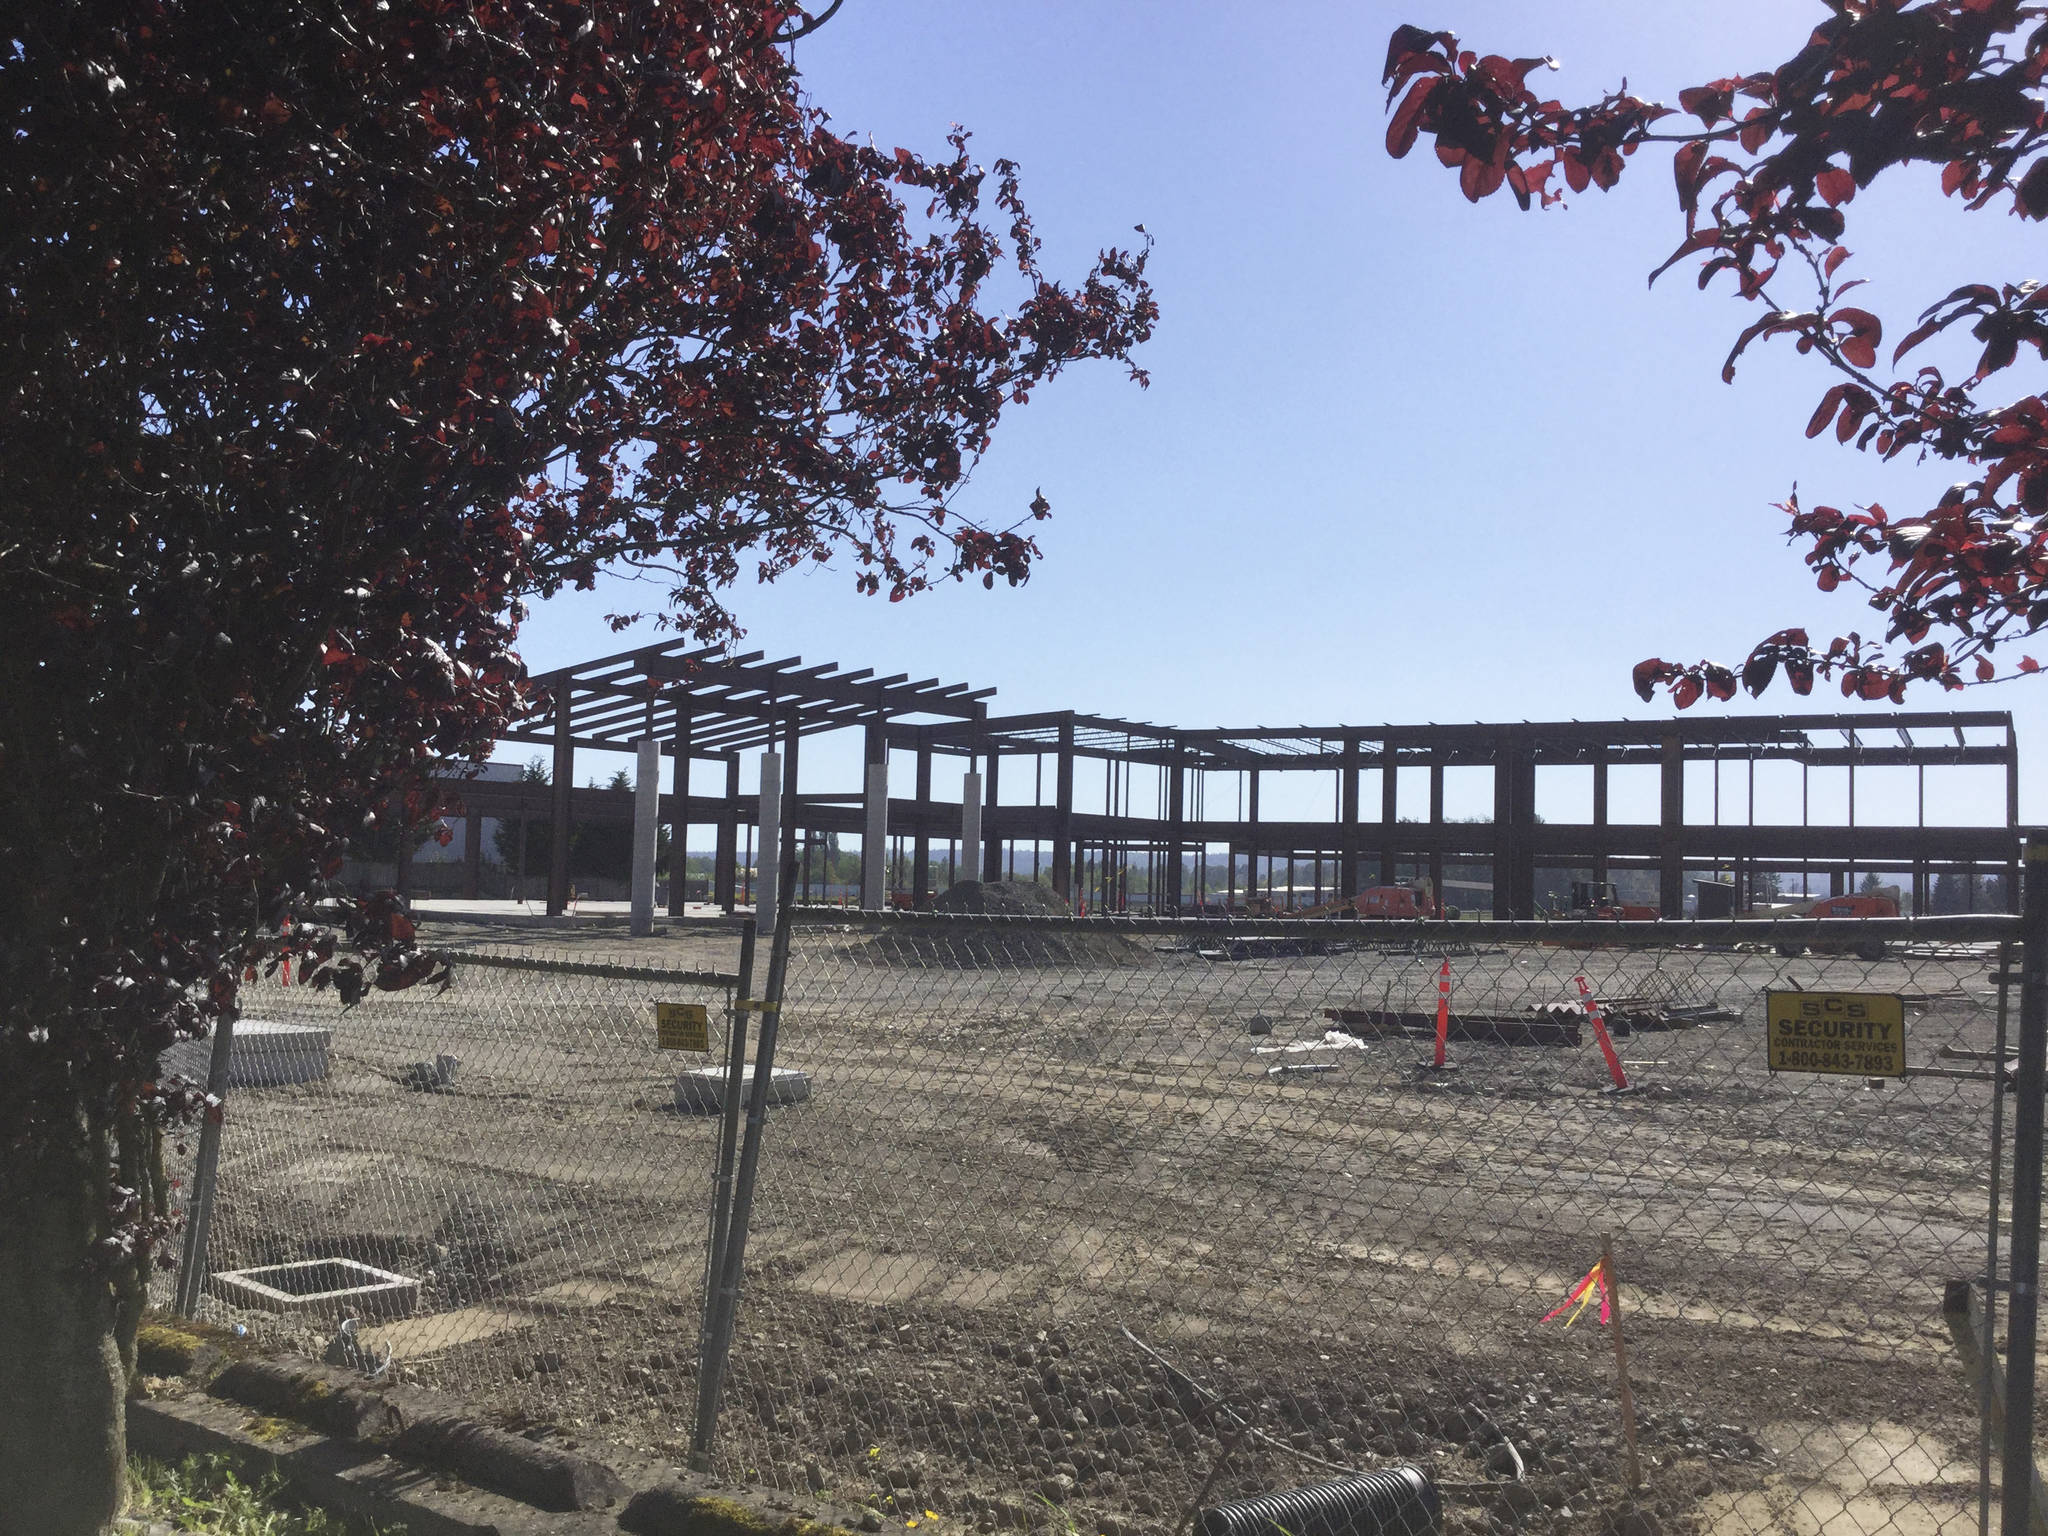 Construction on the Stillaguamish Tribe’s new methadone treatment and healing center is underway south of Arlington Municipal Airport.